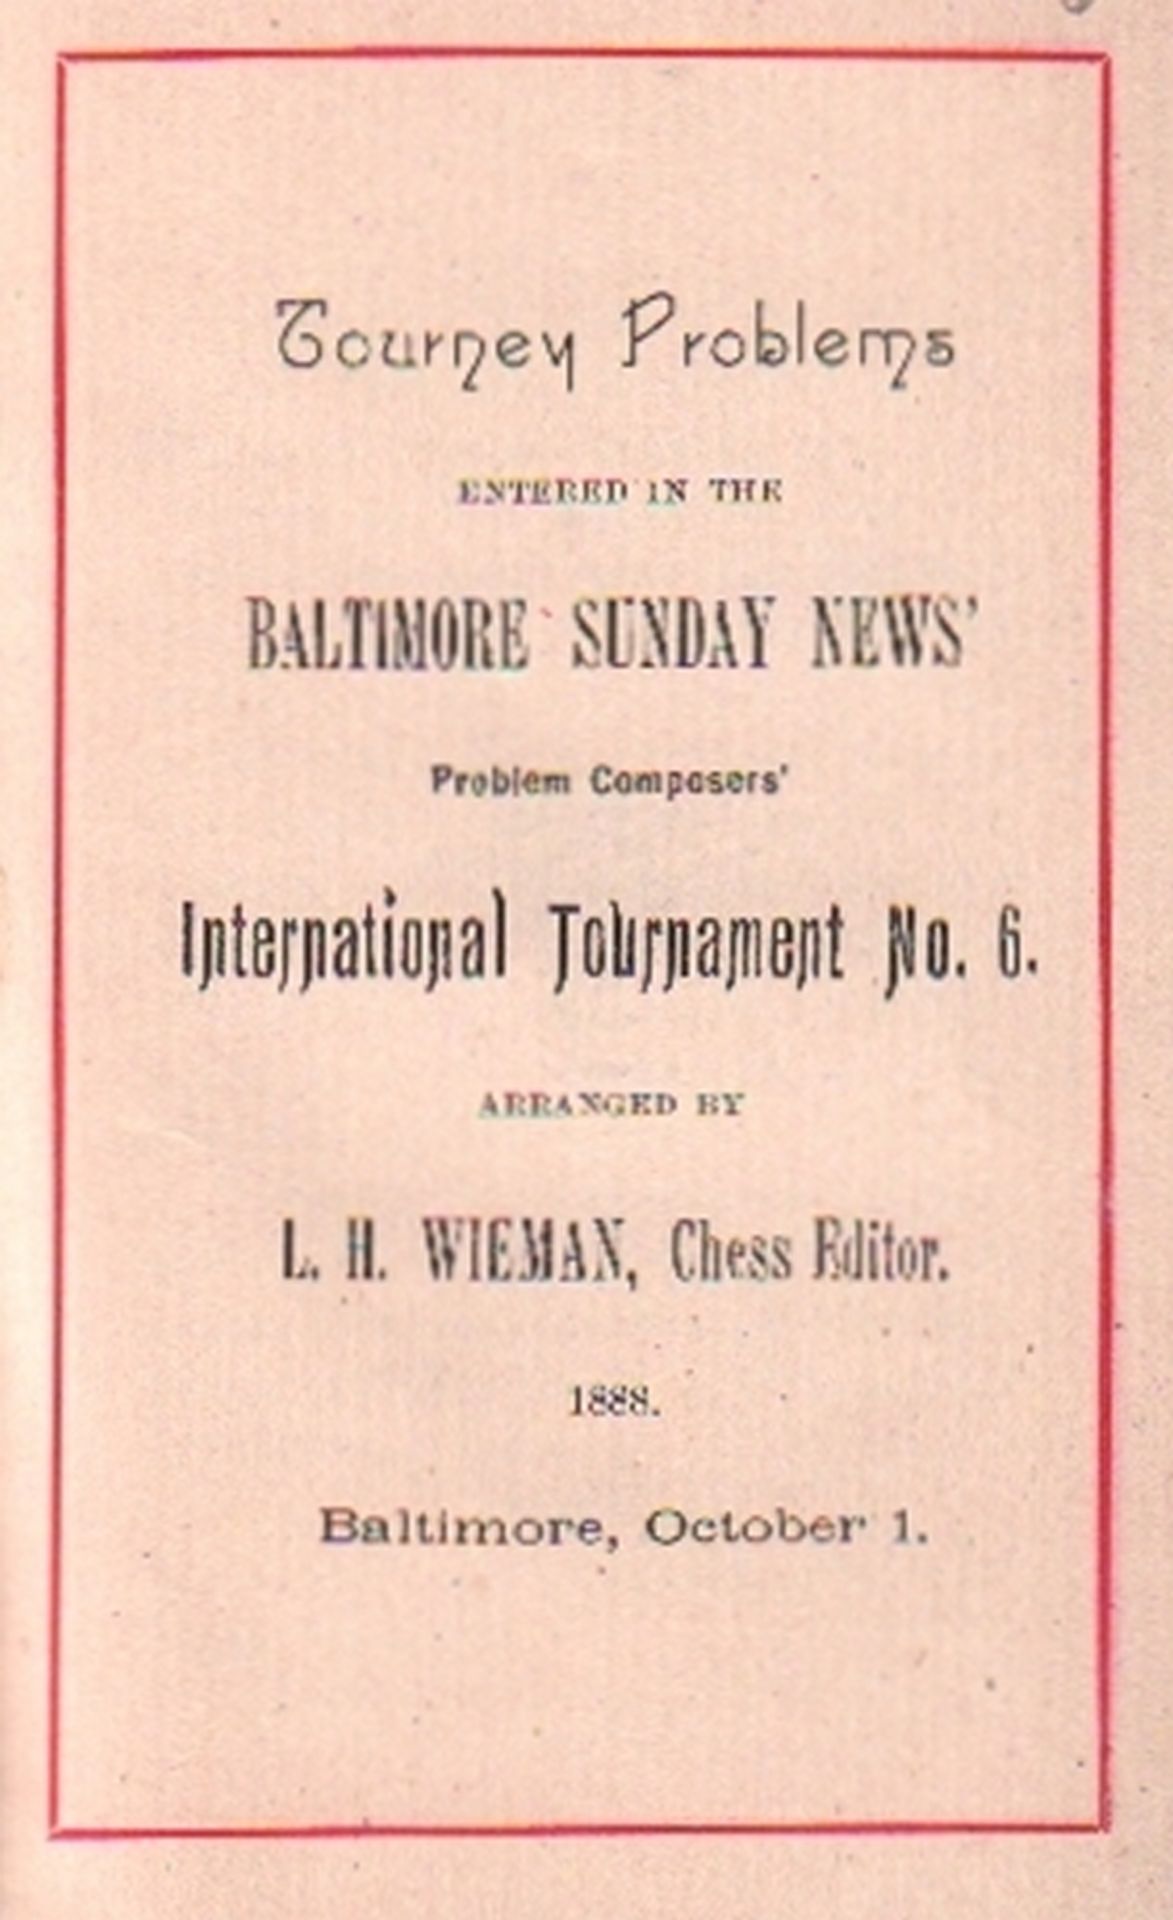 Wieman, L. H. (Hrsg.) Tourney Problems entered in the Baltimore Sunday News‘ Problem Composers‘